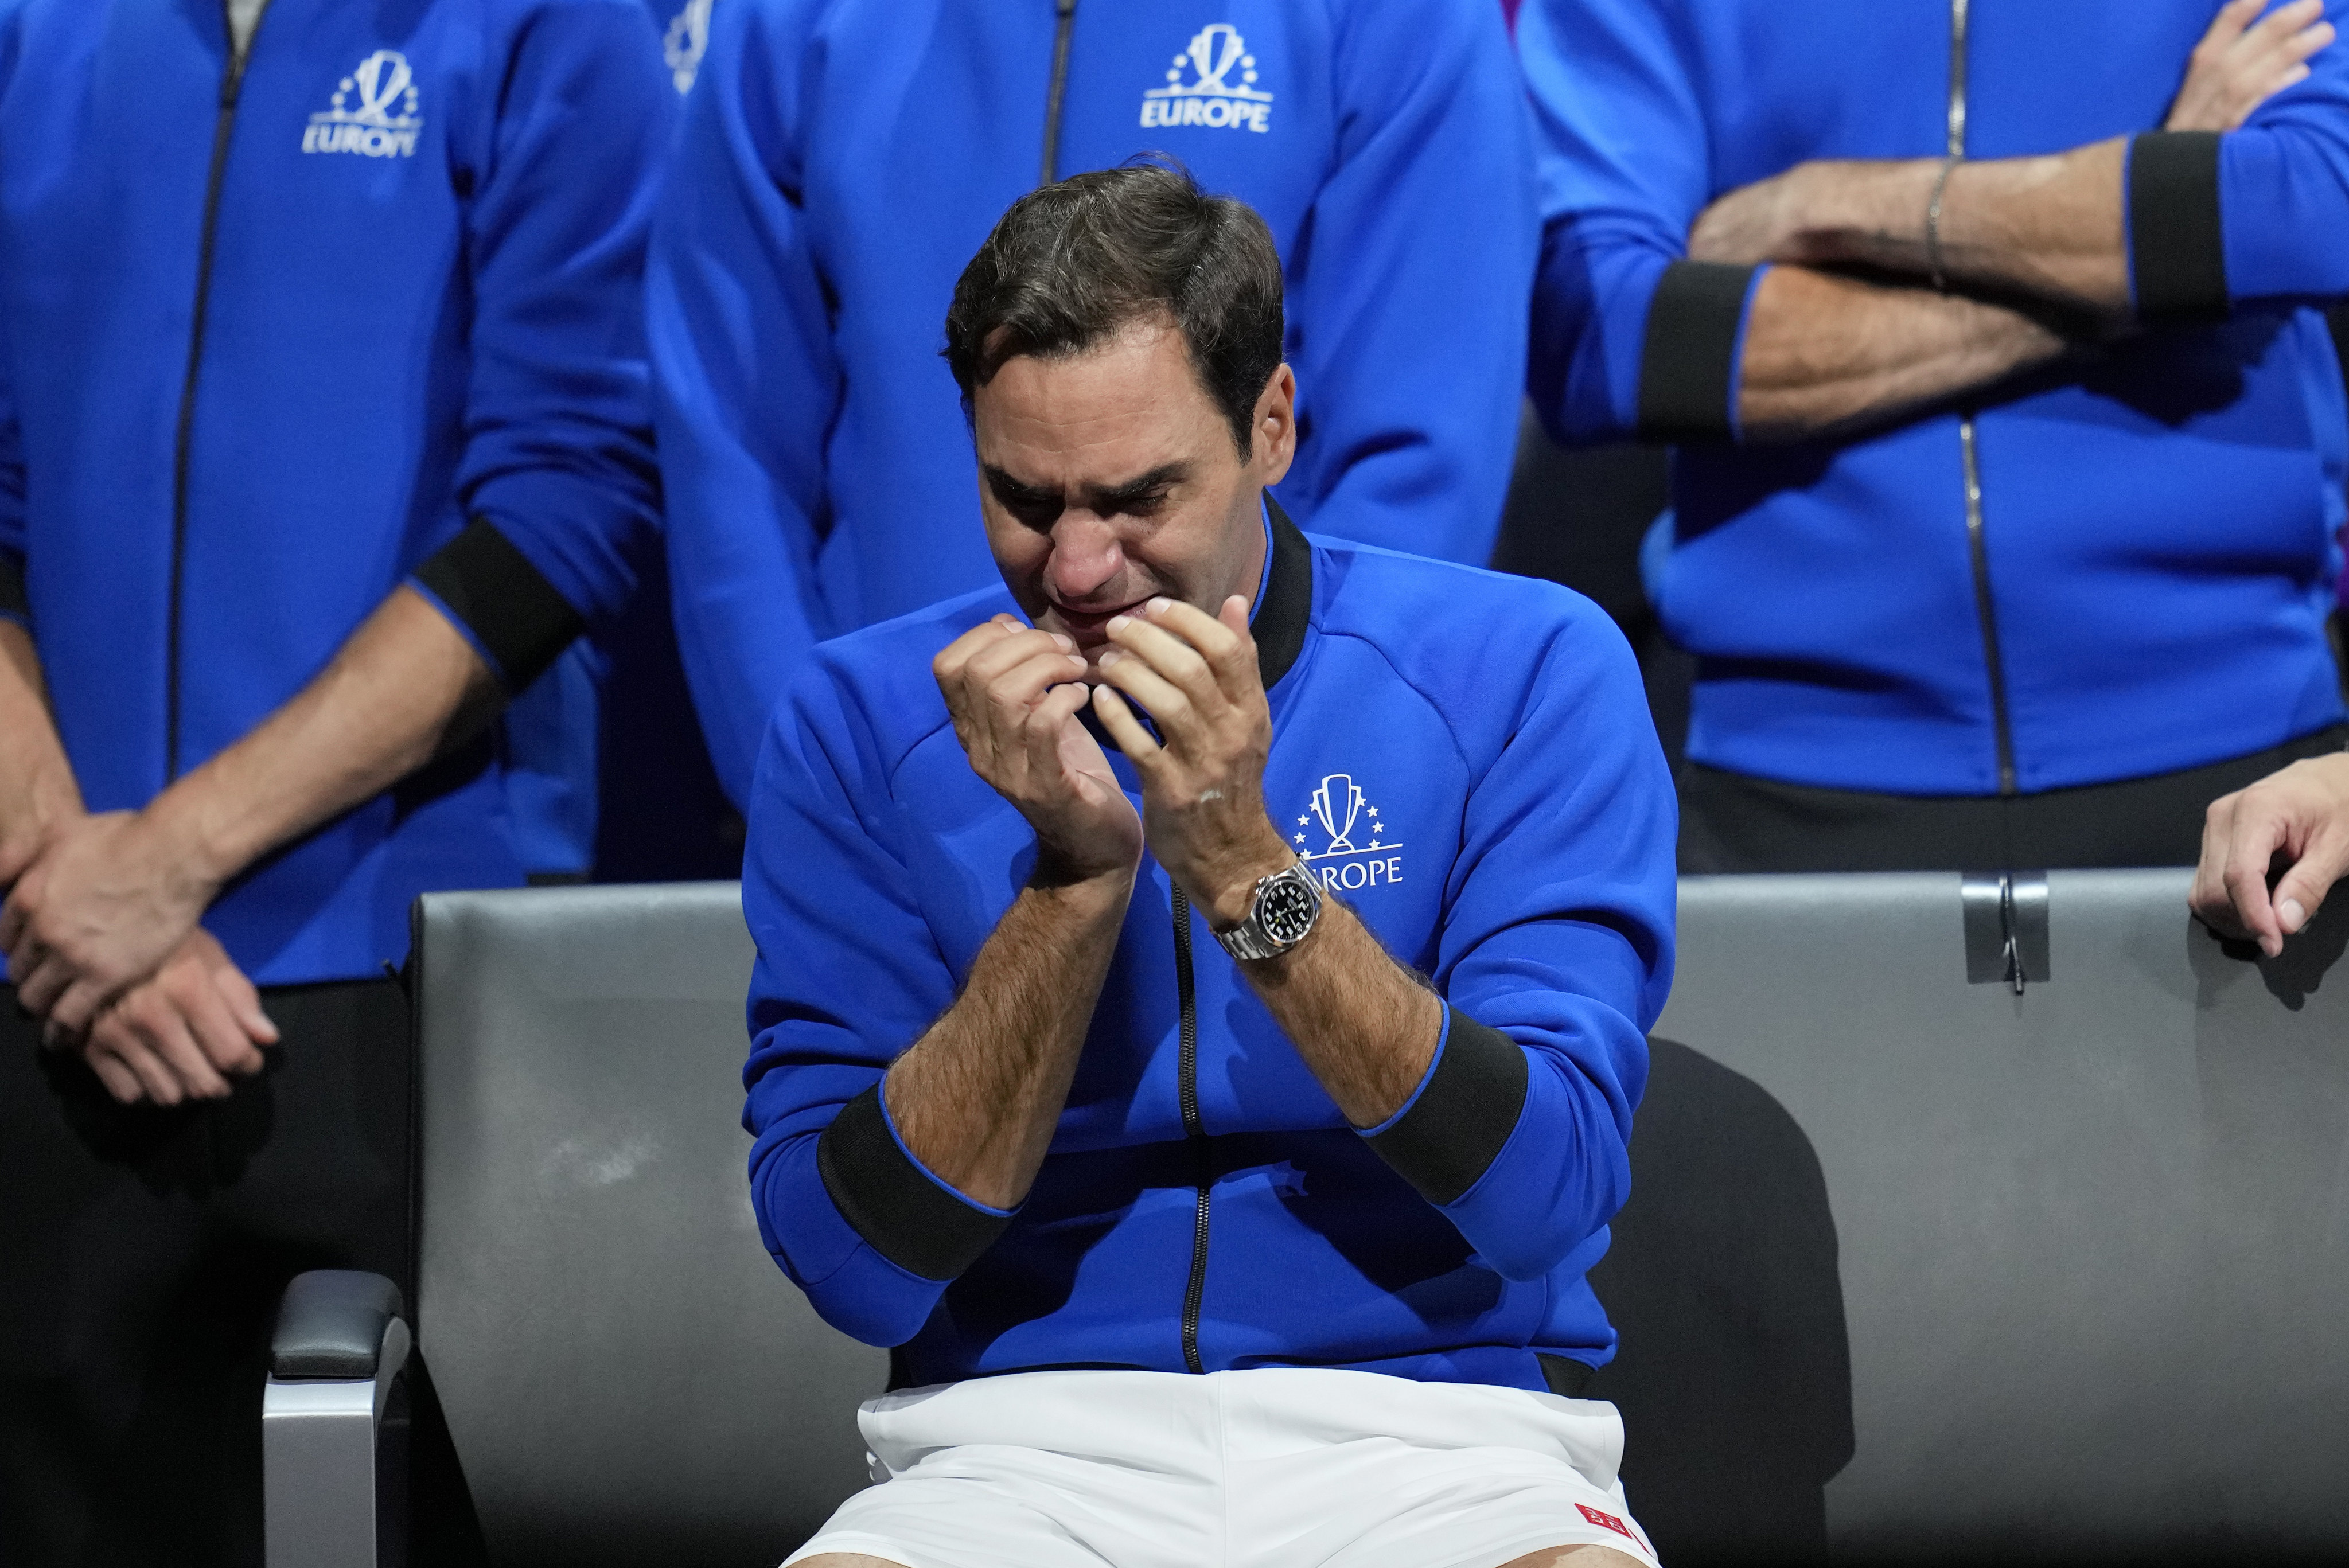 Laver Cup Roger Federer breaks down in tears as he bids farewell in doubles loss with Rafael Nadal South China Morning Post